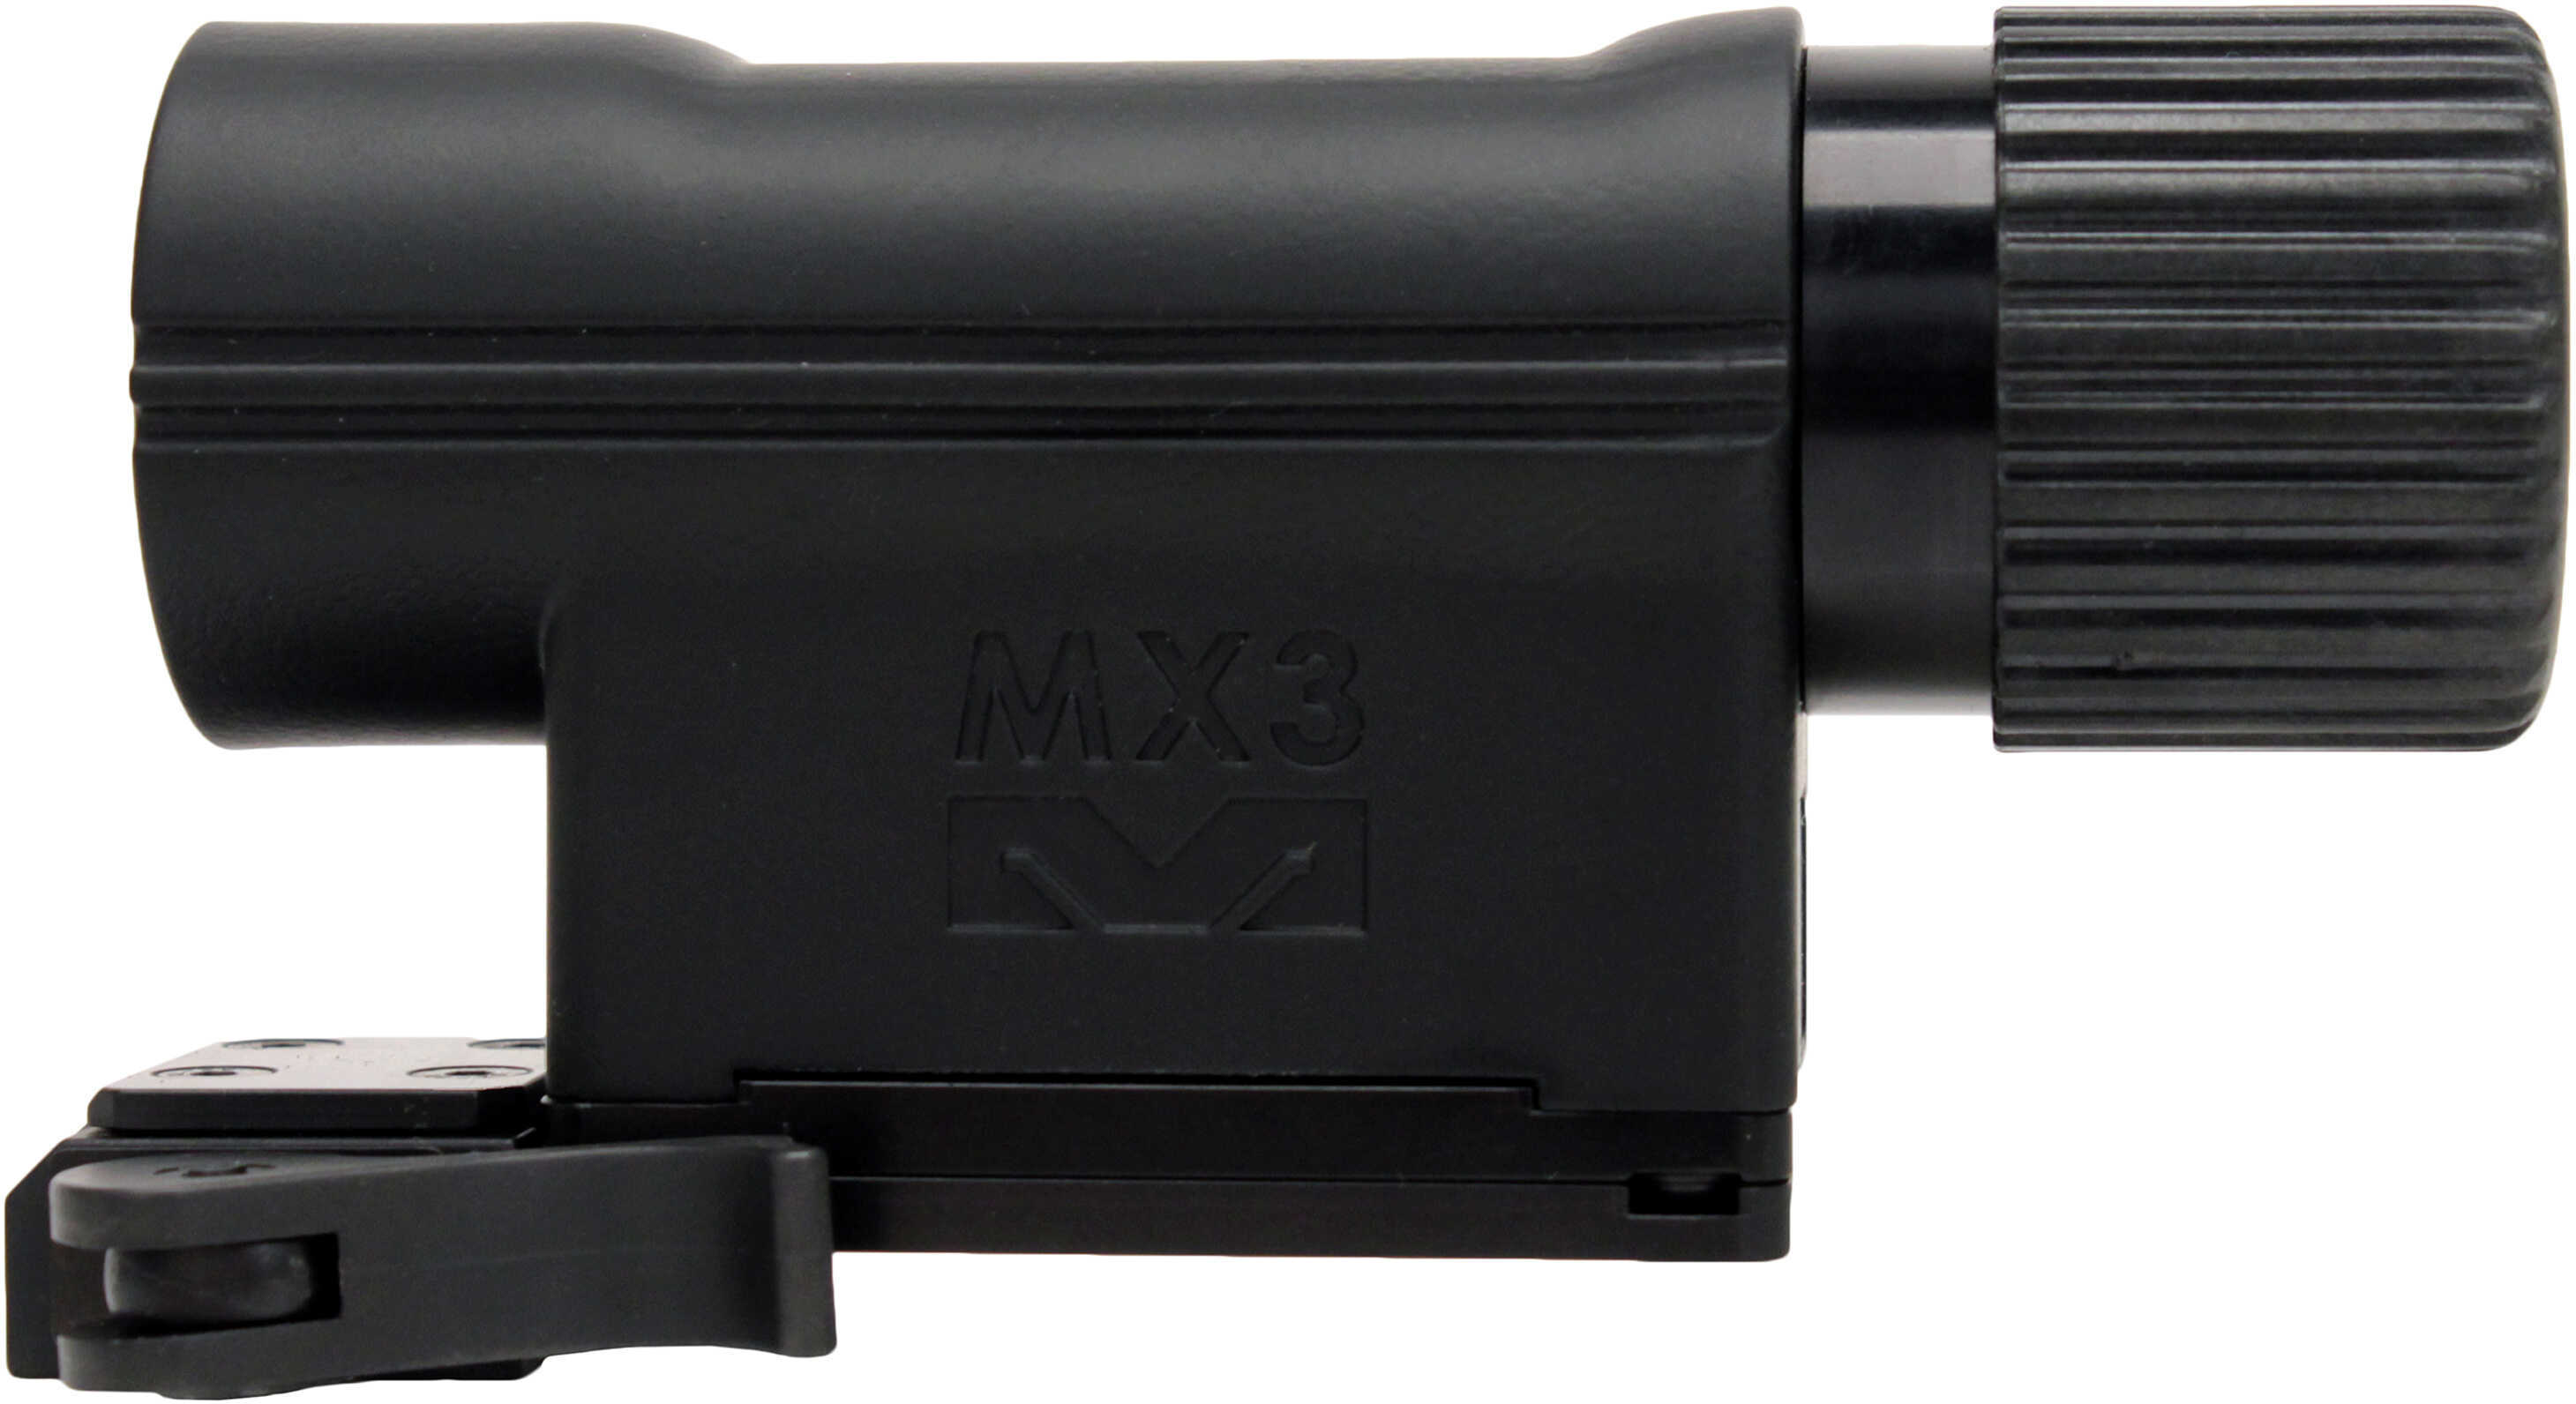 Mako Group 3x Magnifier for Reflex/Red Dot Sights MEPRO-MX3